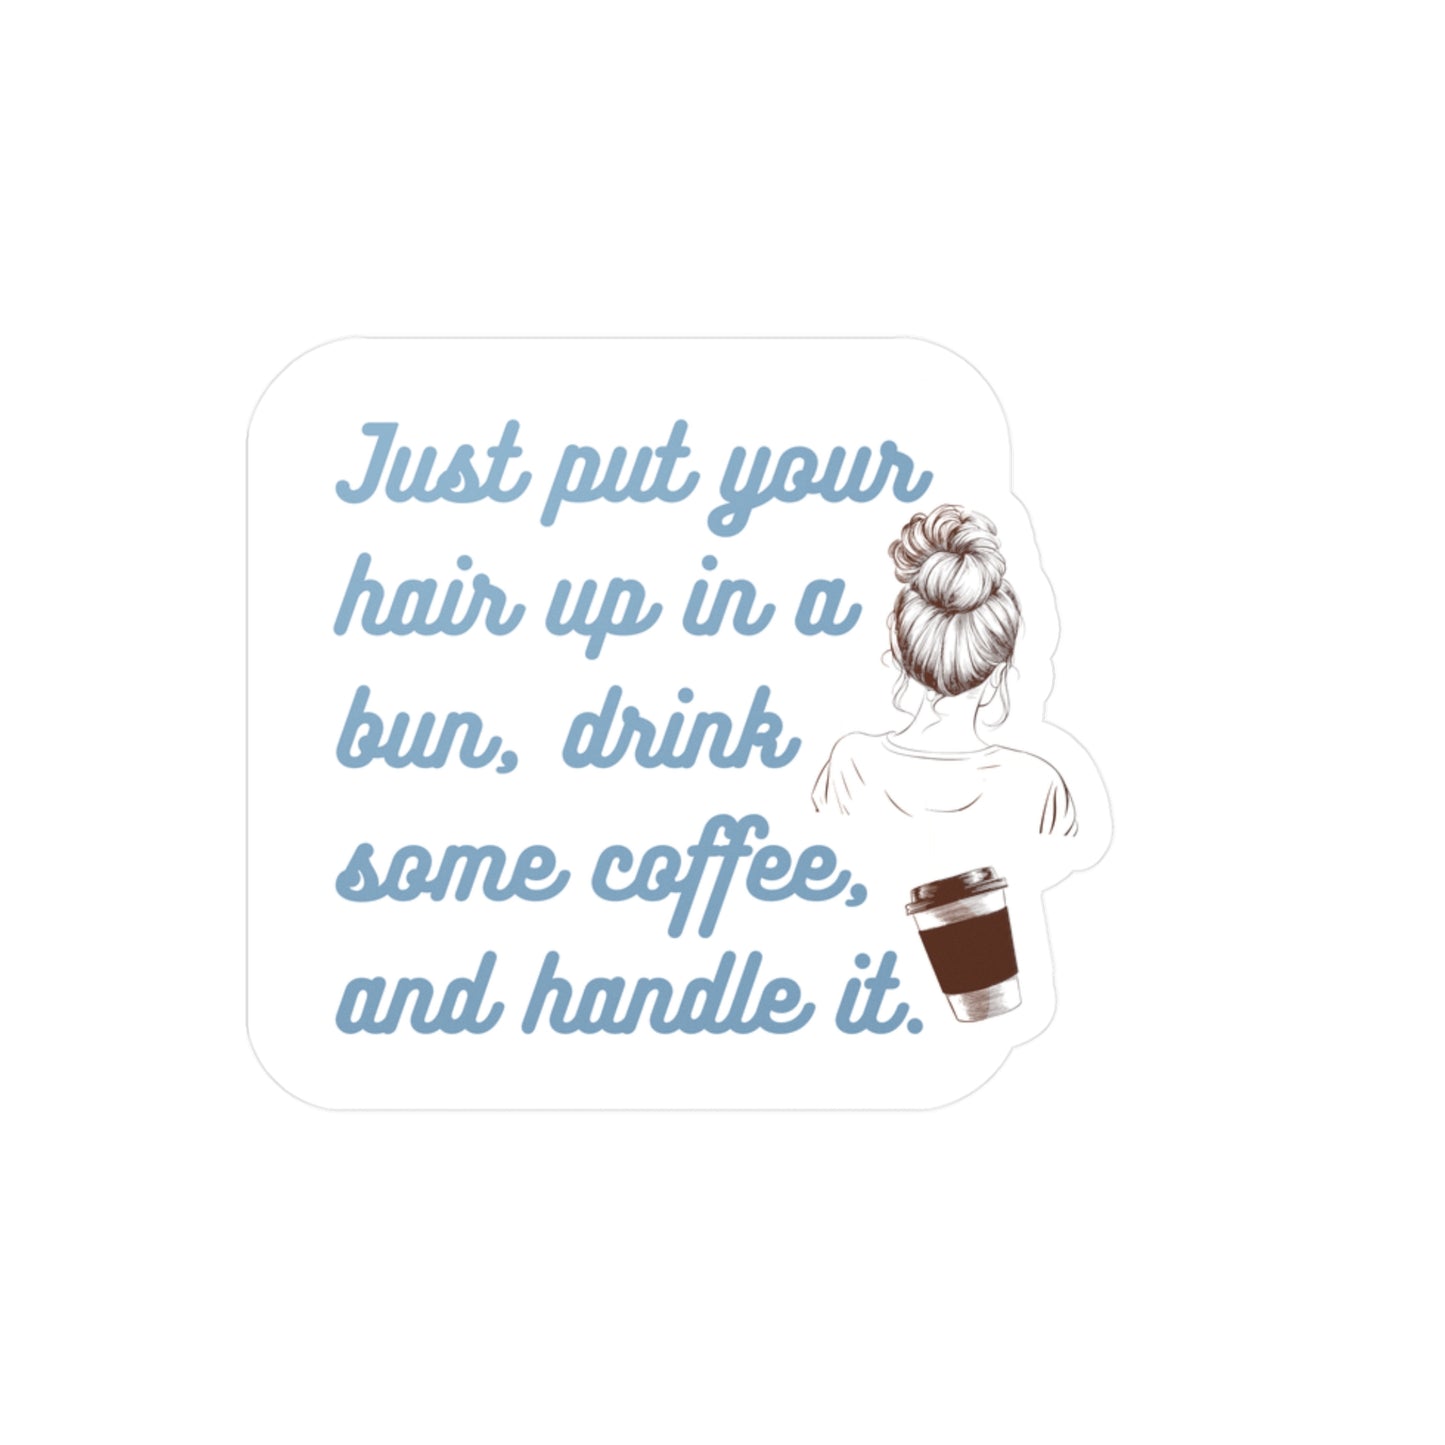 Just put your hair up in a bun, drink some coffee, and handle it | Sticker, Coffee, Bun, Hair, Funny, Girl